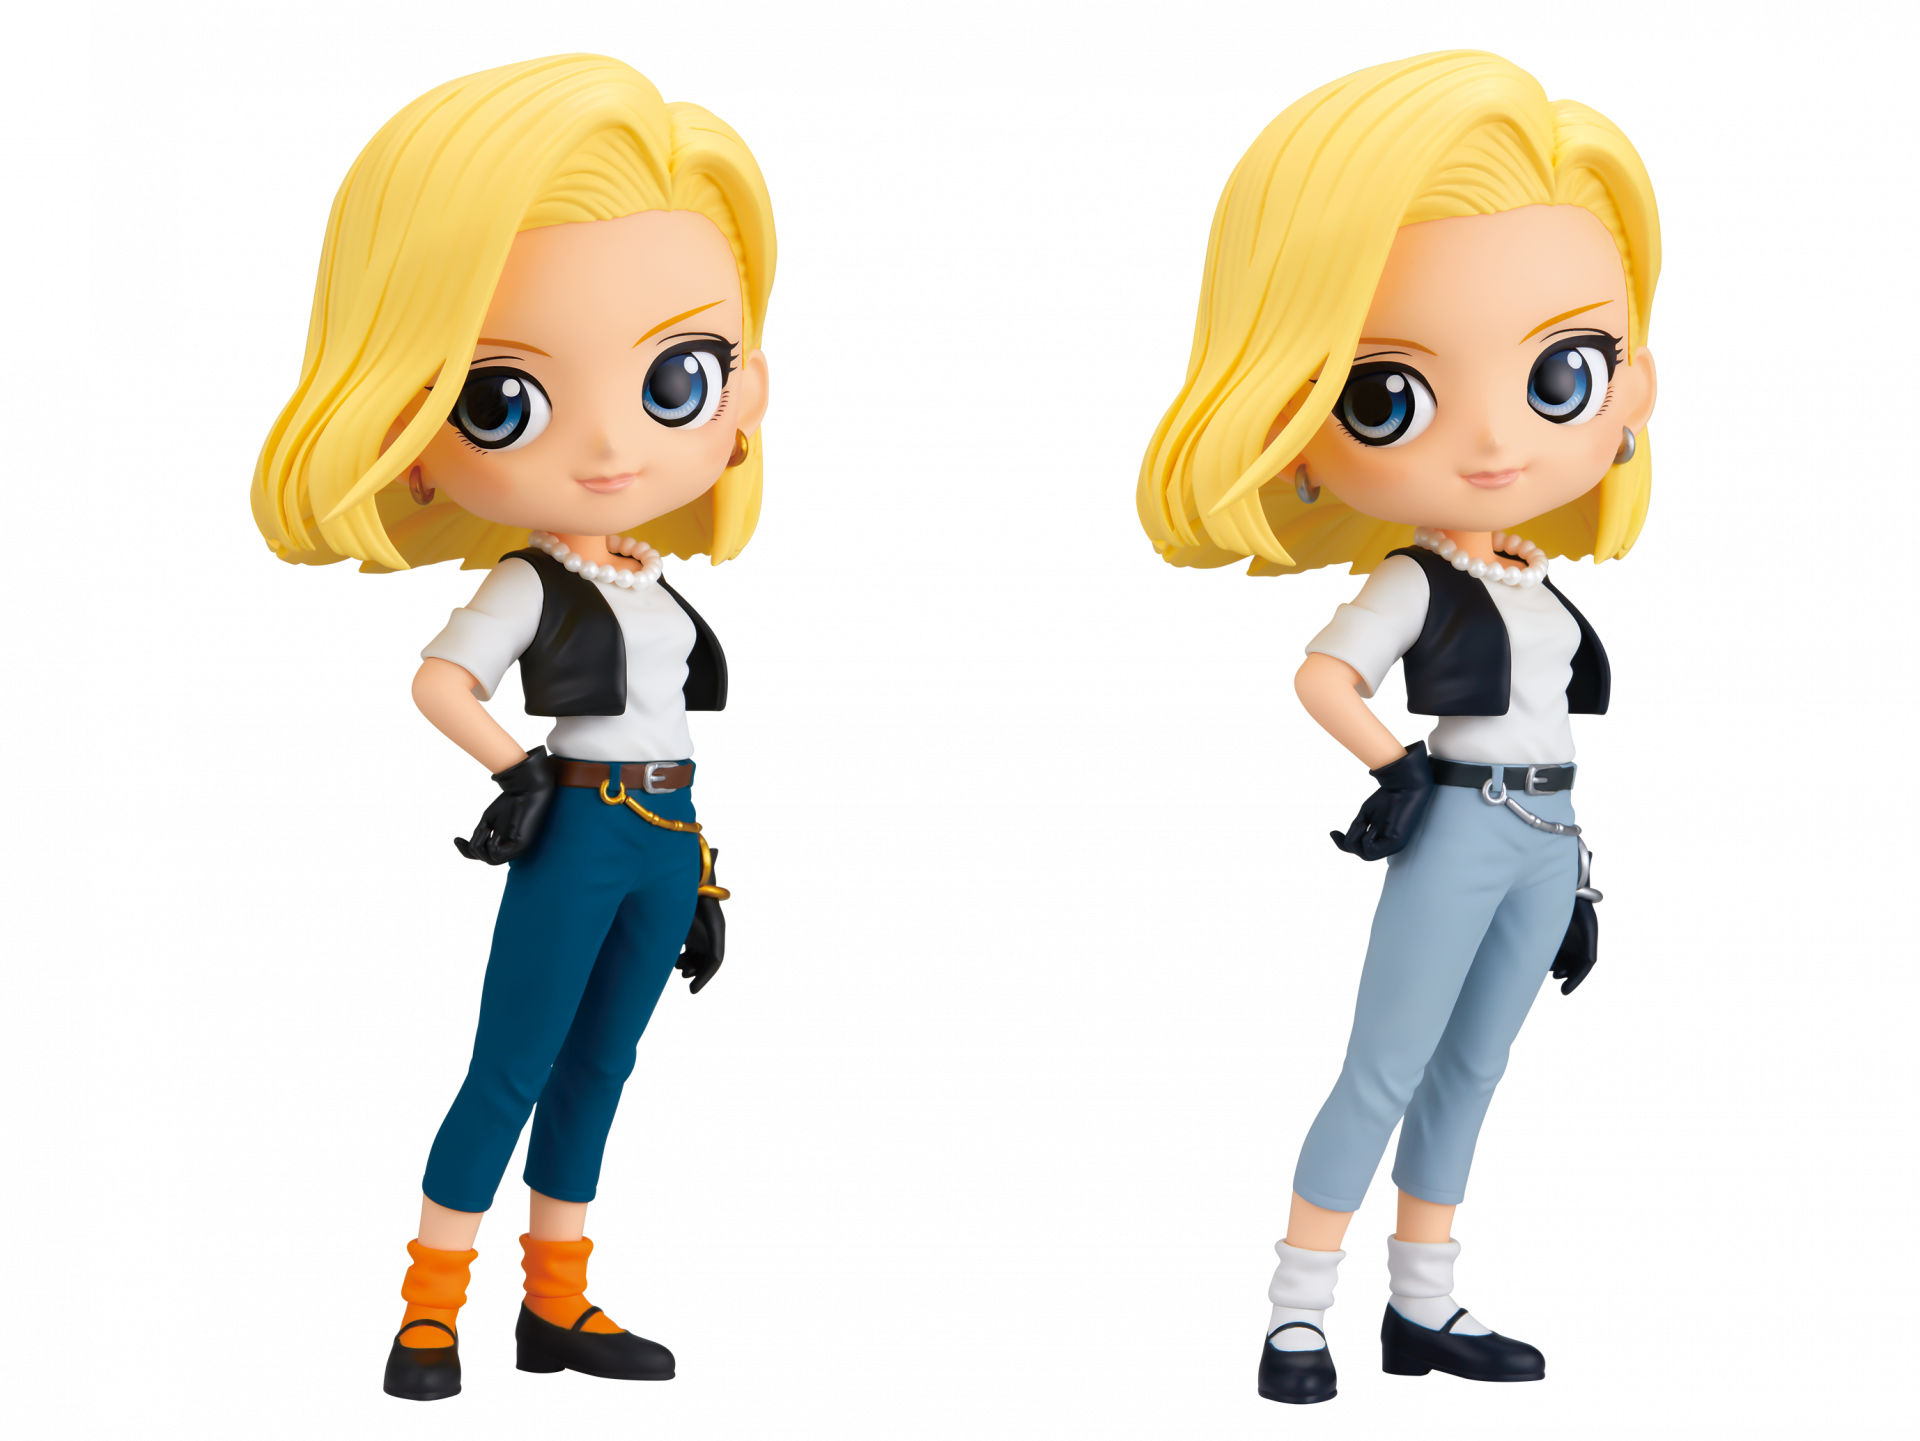 Android 18 Comes to the Q posket Series!